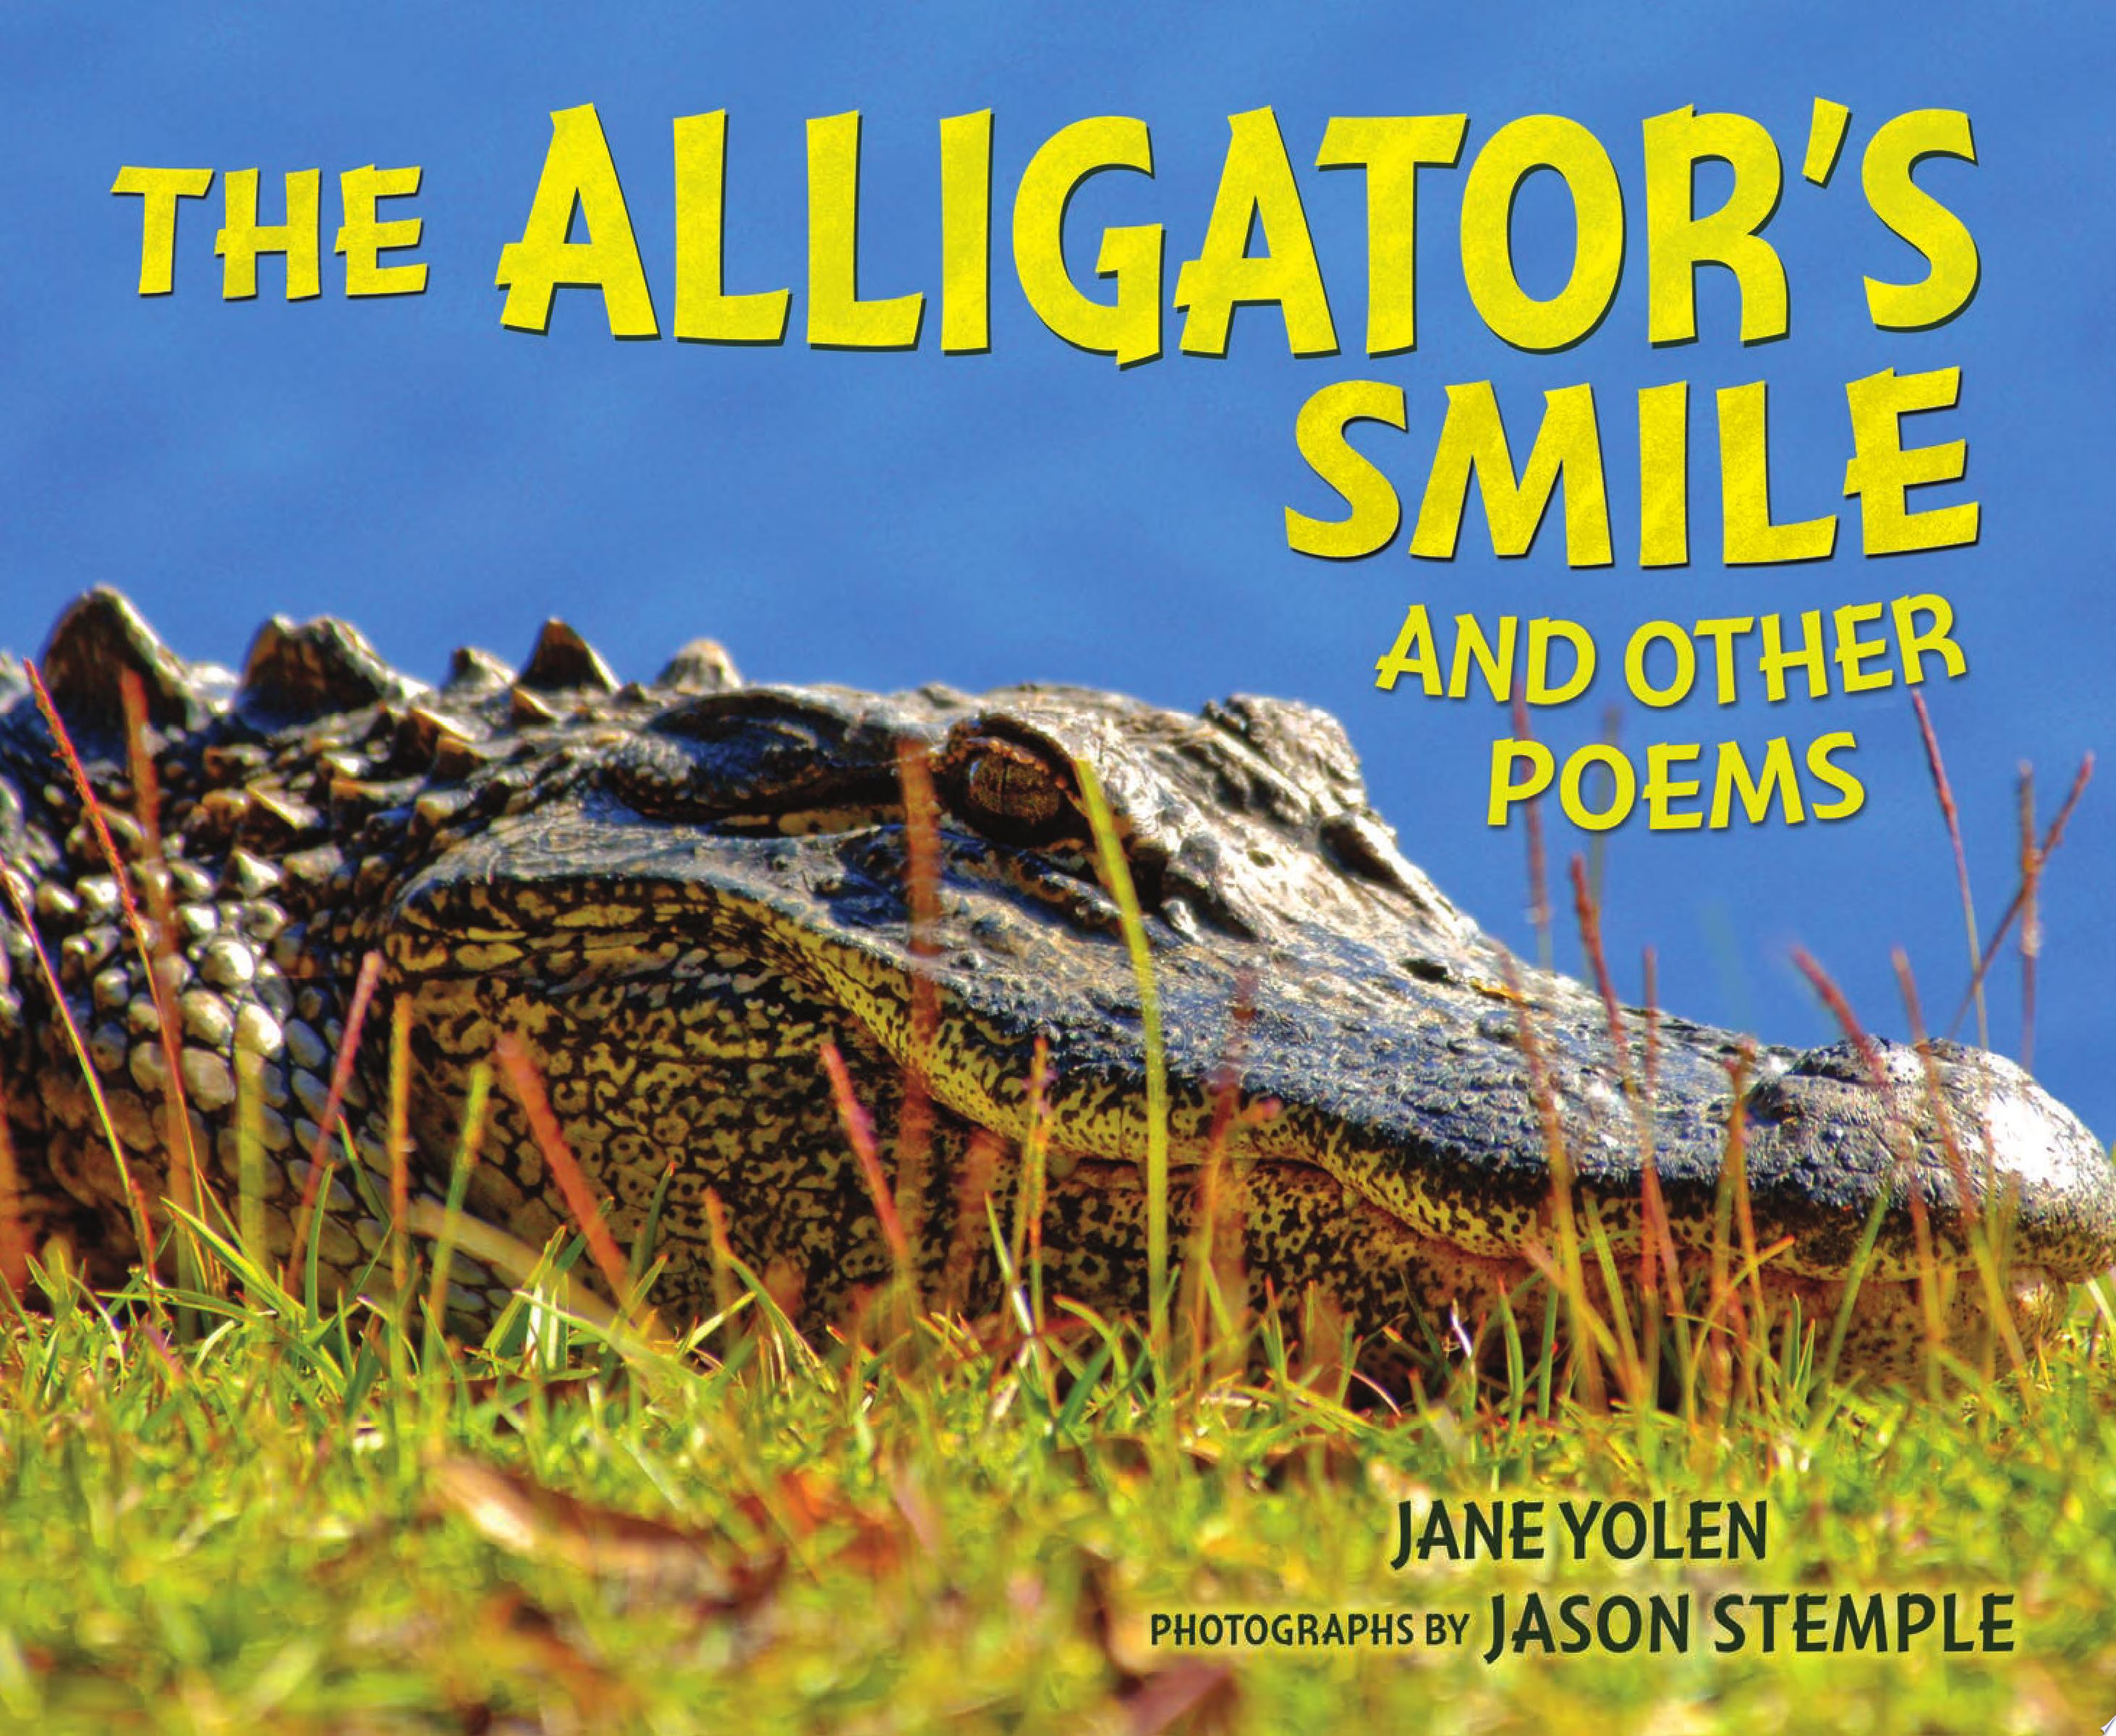 Image for "The Alligator&#039;s Smile and Other Poems"